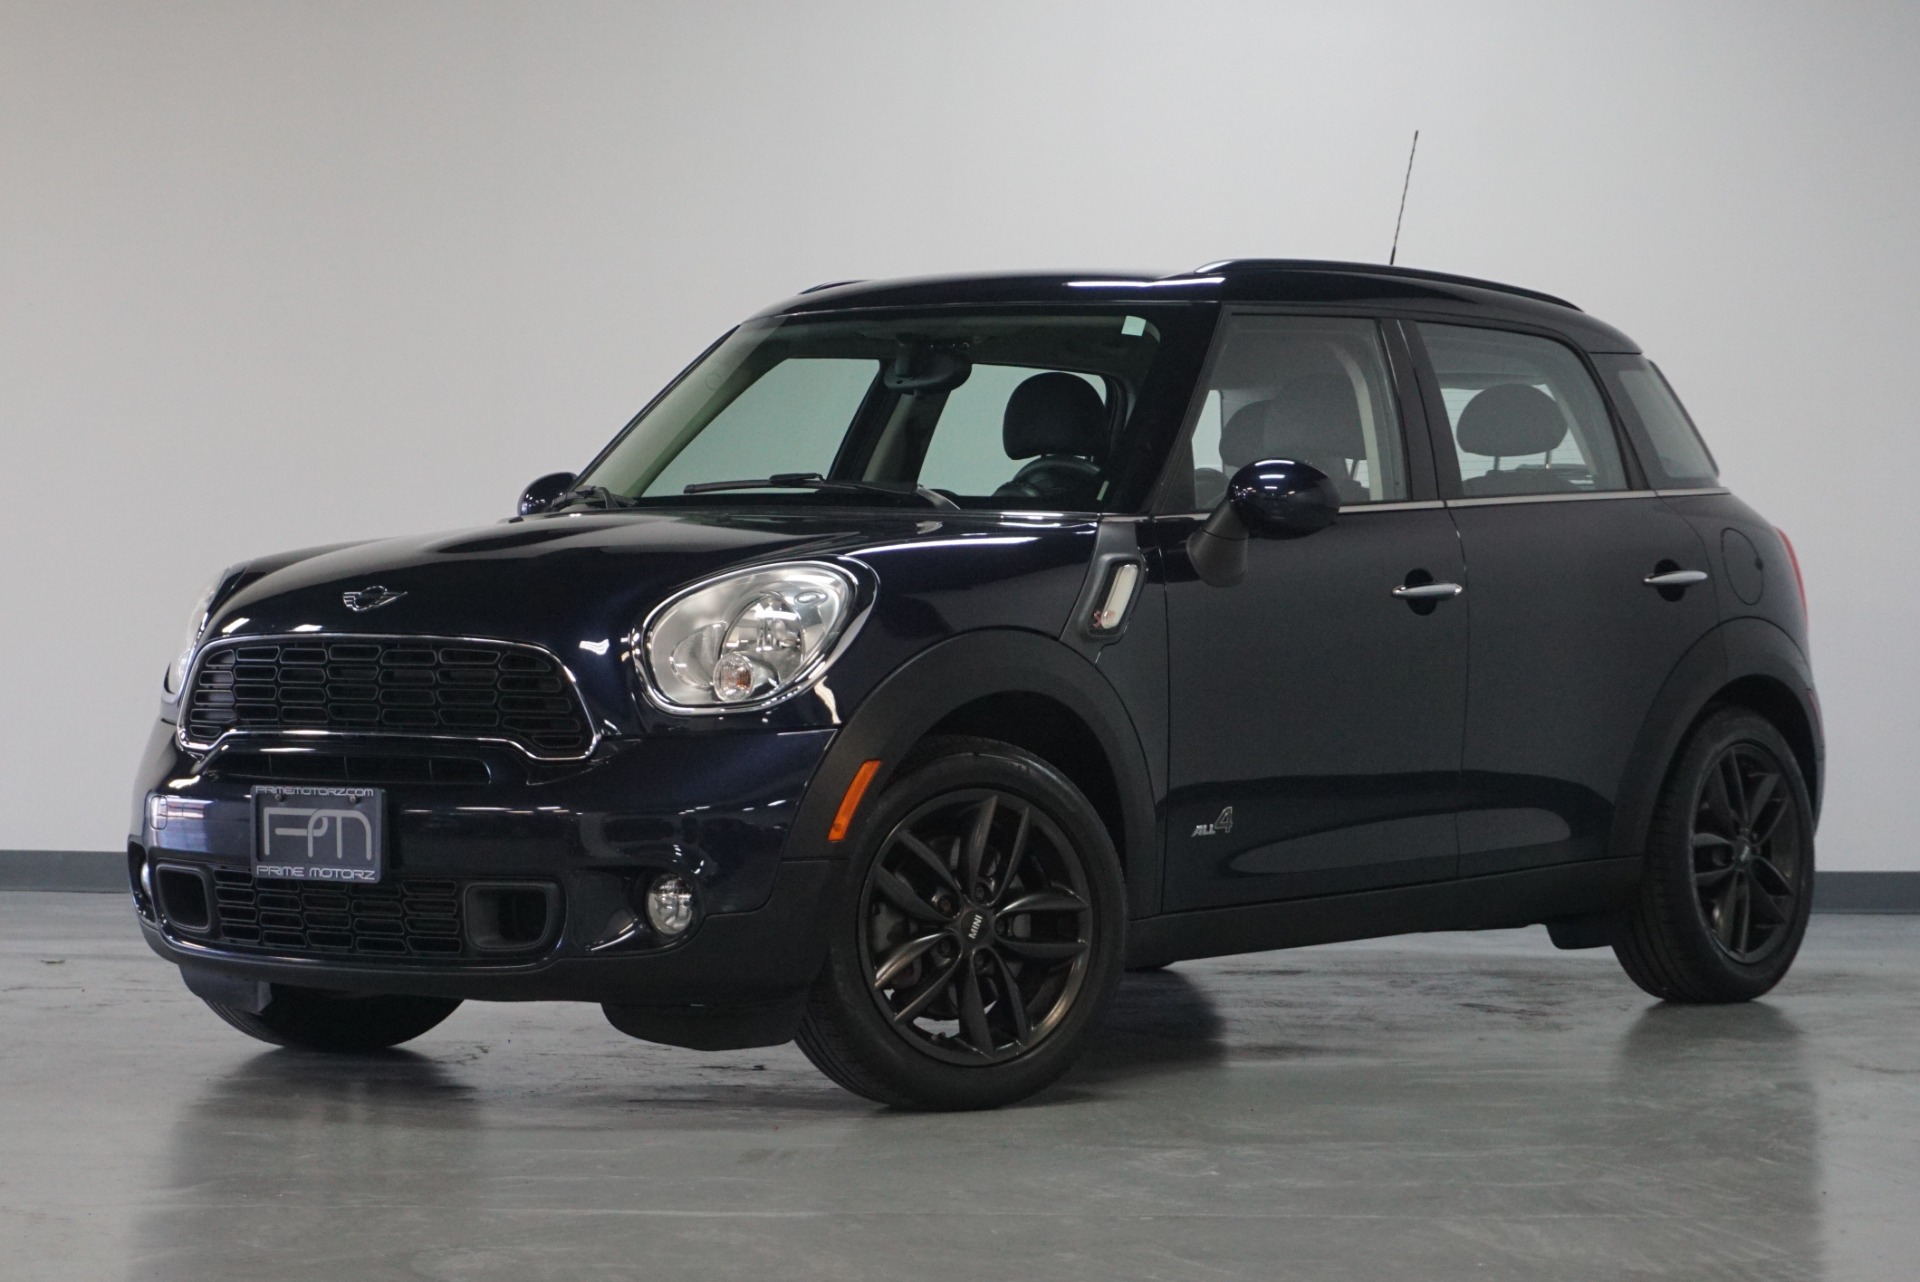 Used 2012 Cosmic Blue Metallic MINI Cooper Countryman AWD S ALL4 For Sale  (Sold) | Prime Motorz Stock #2724